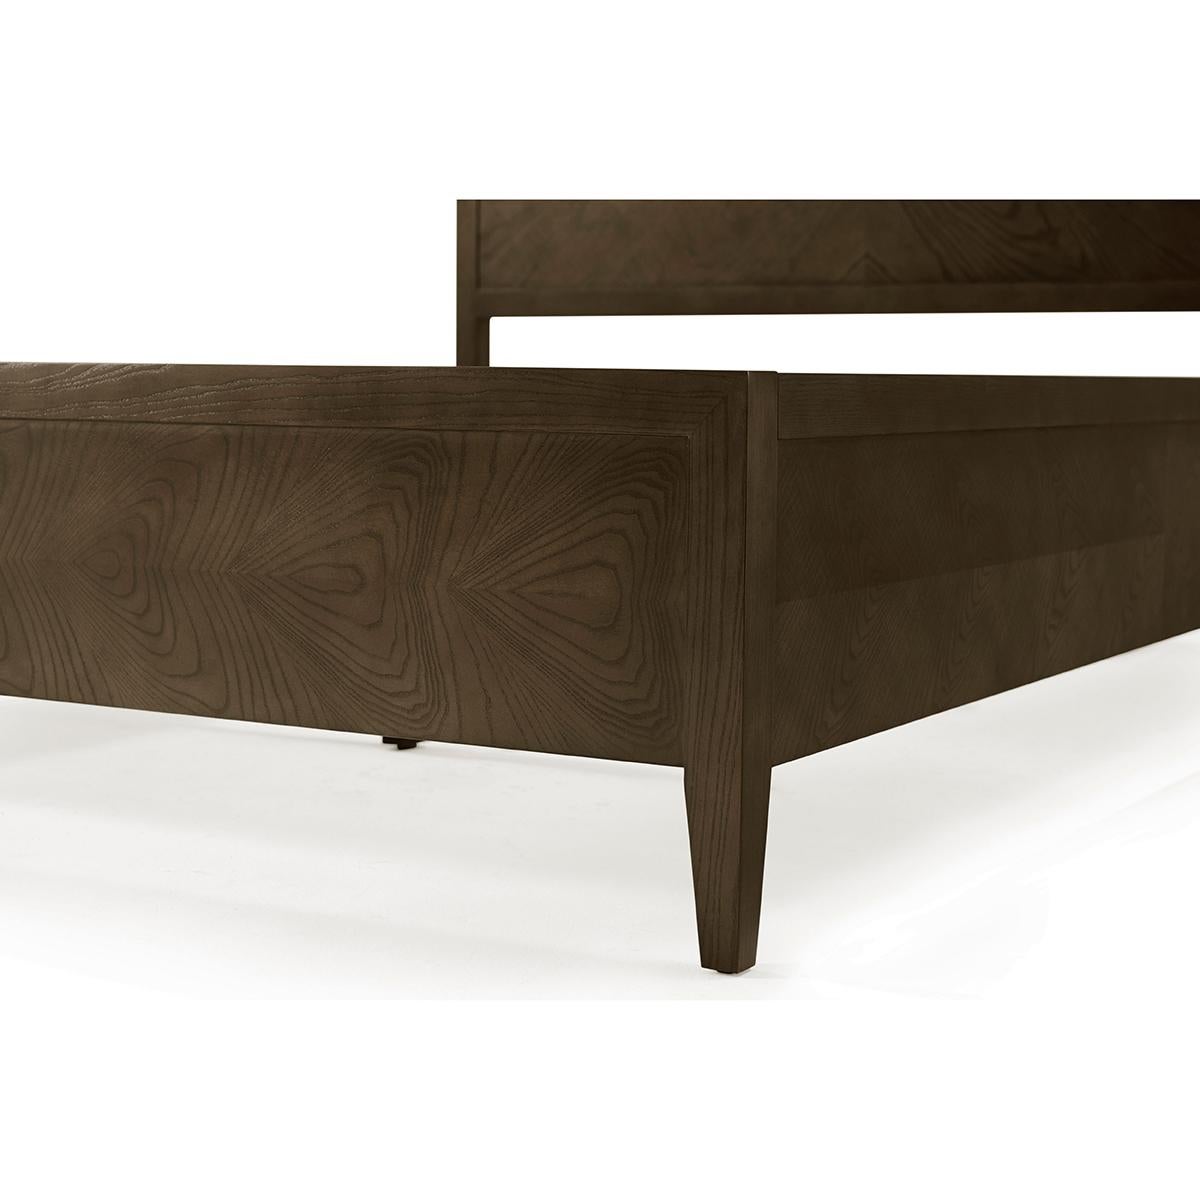 Contemporary Classic Modern Frame Bed - Queen For Sale